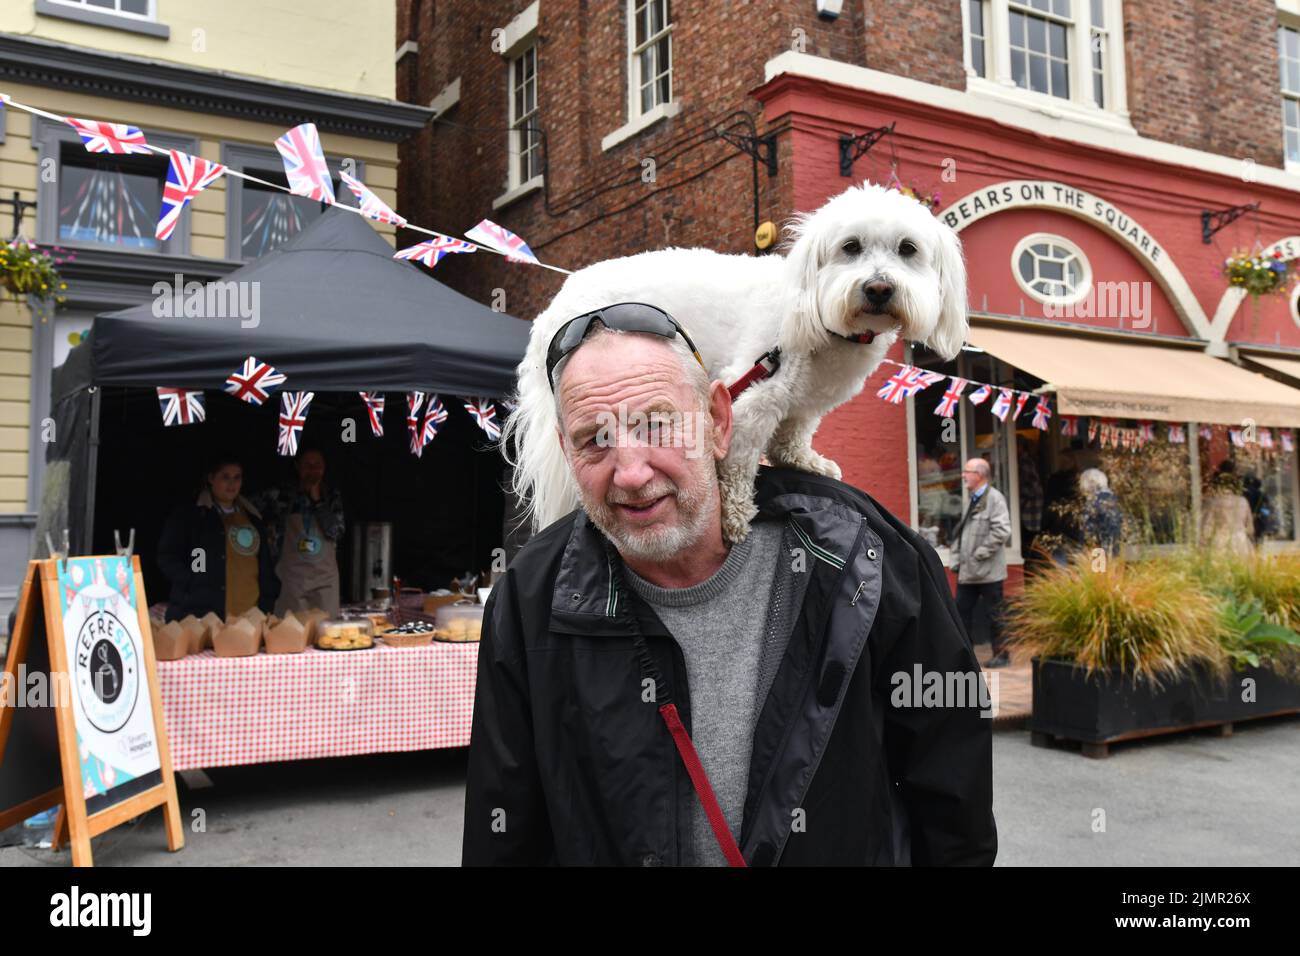 Man walking with his pet dog on his shoulders in Britain 2022 Stock Photo